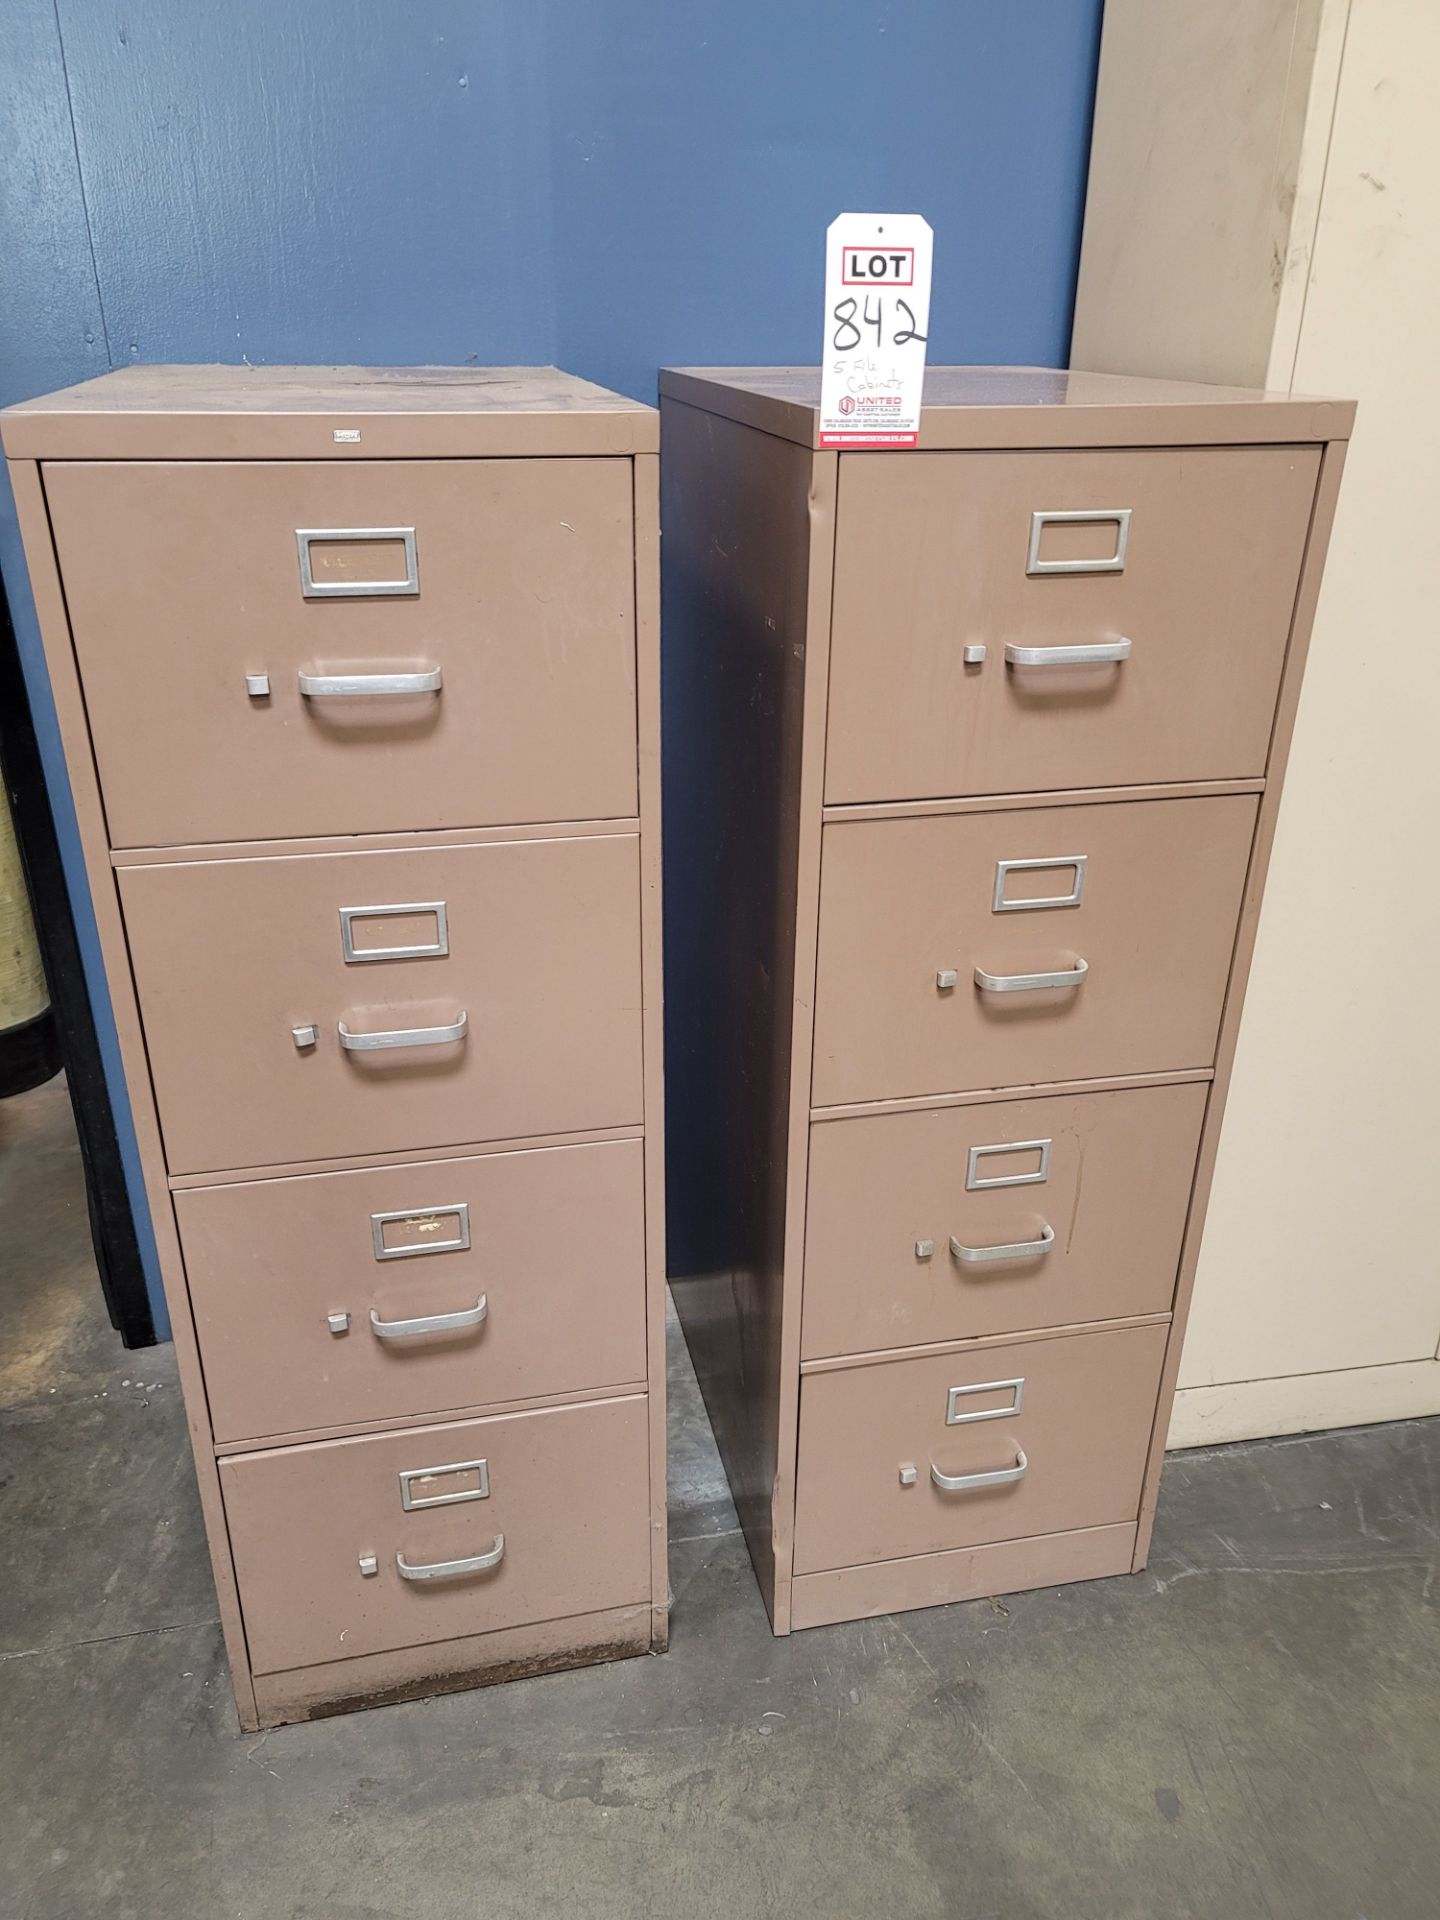 LOT - (5) FILE CABINETS, CONTENTS NOT INCLUDED